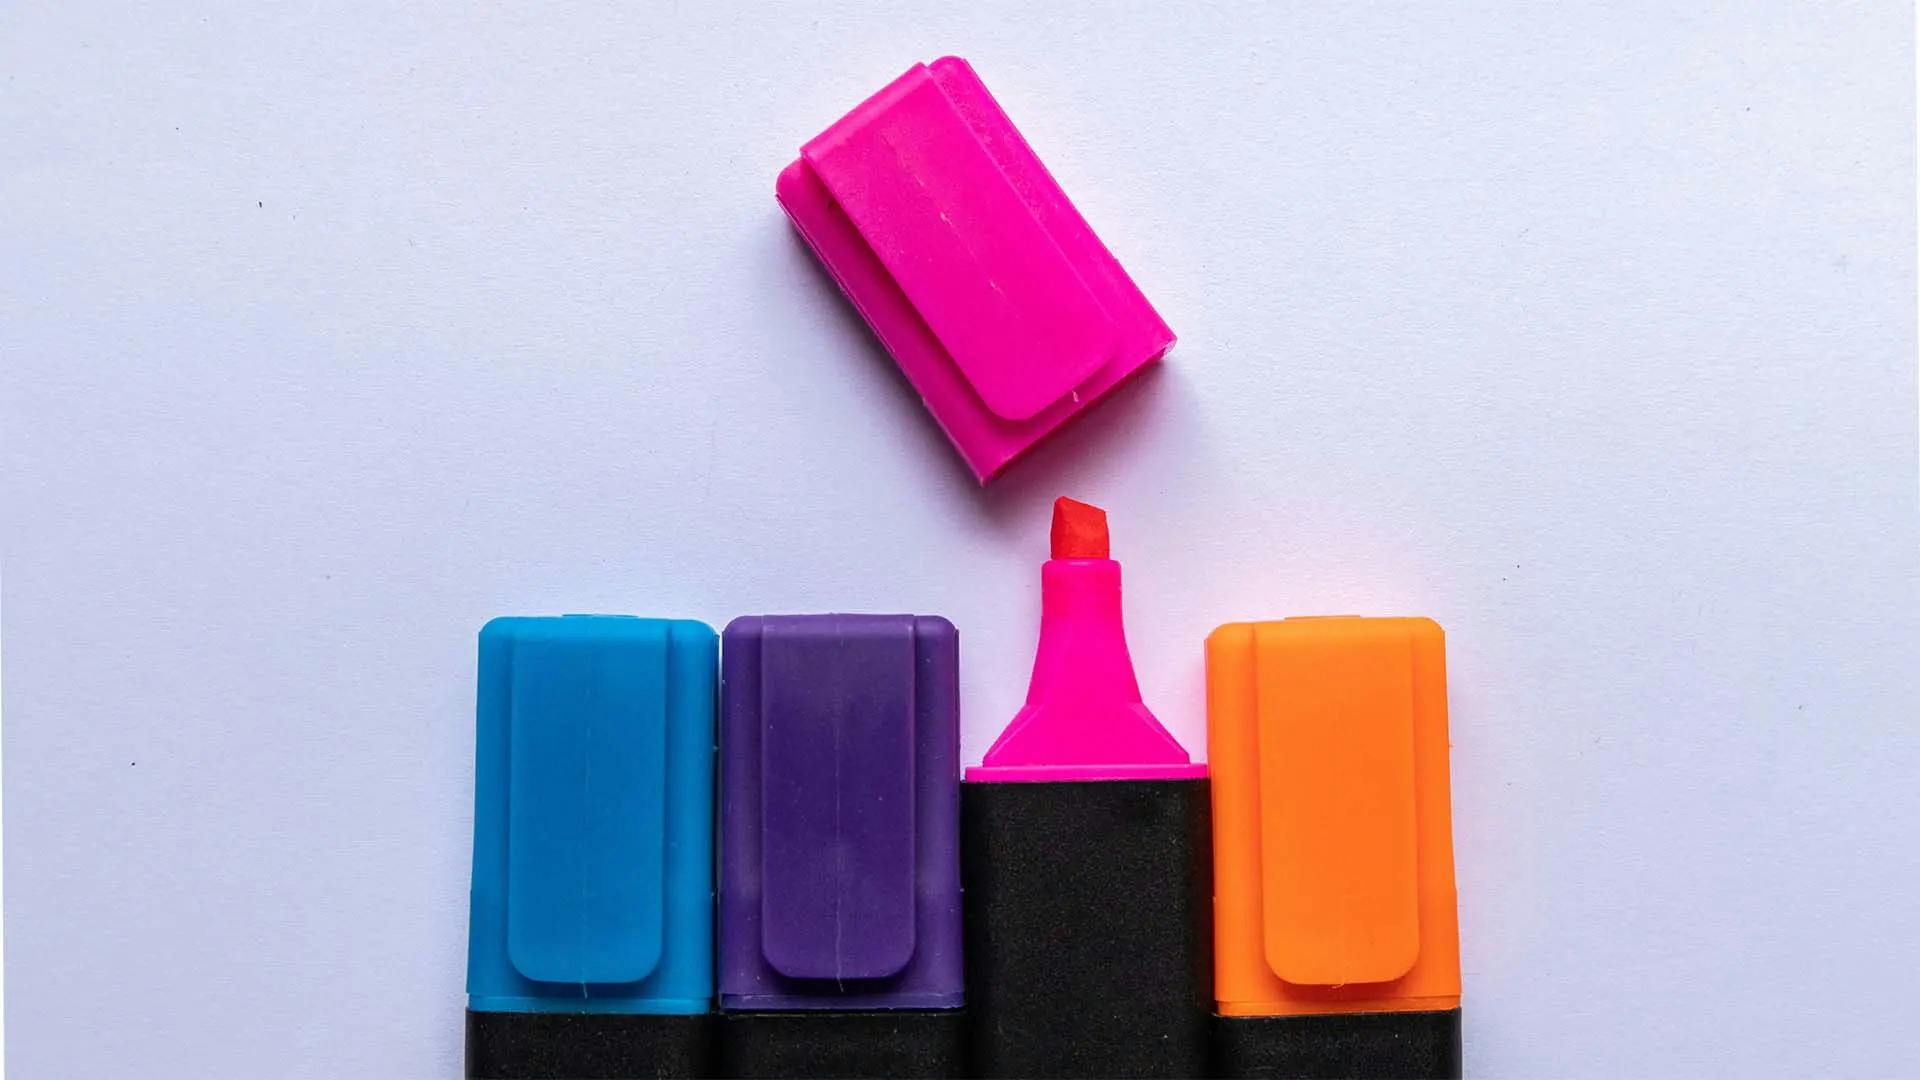 Four highlighter pens in various colors, and the pink highlighter has its cap removed